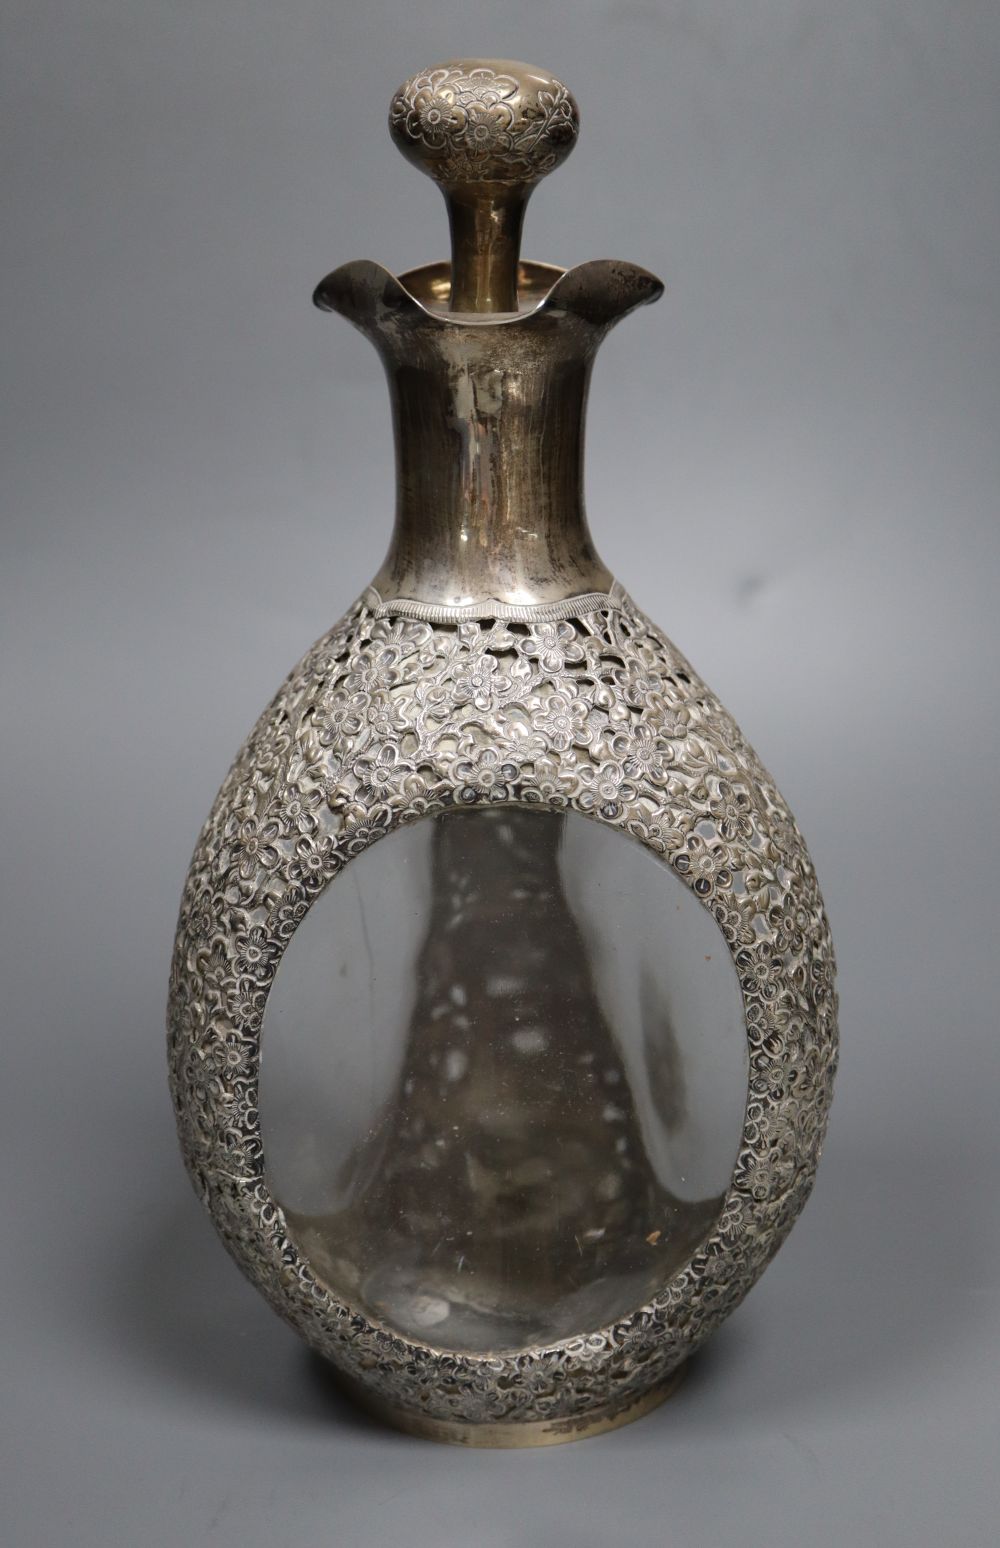 A Hong Kong sterling mounted Haigs bottle decanter and stopper, overall 26cm.